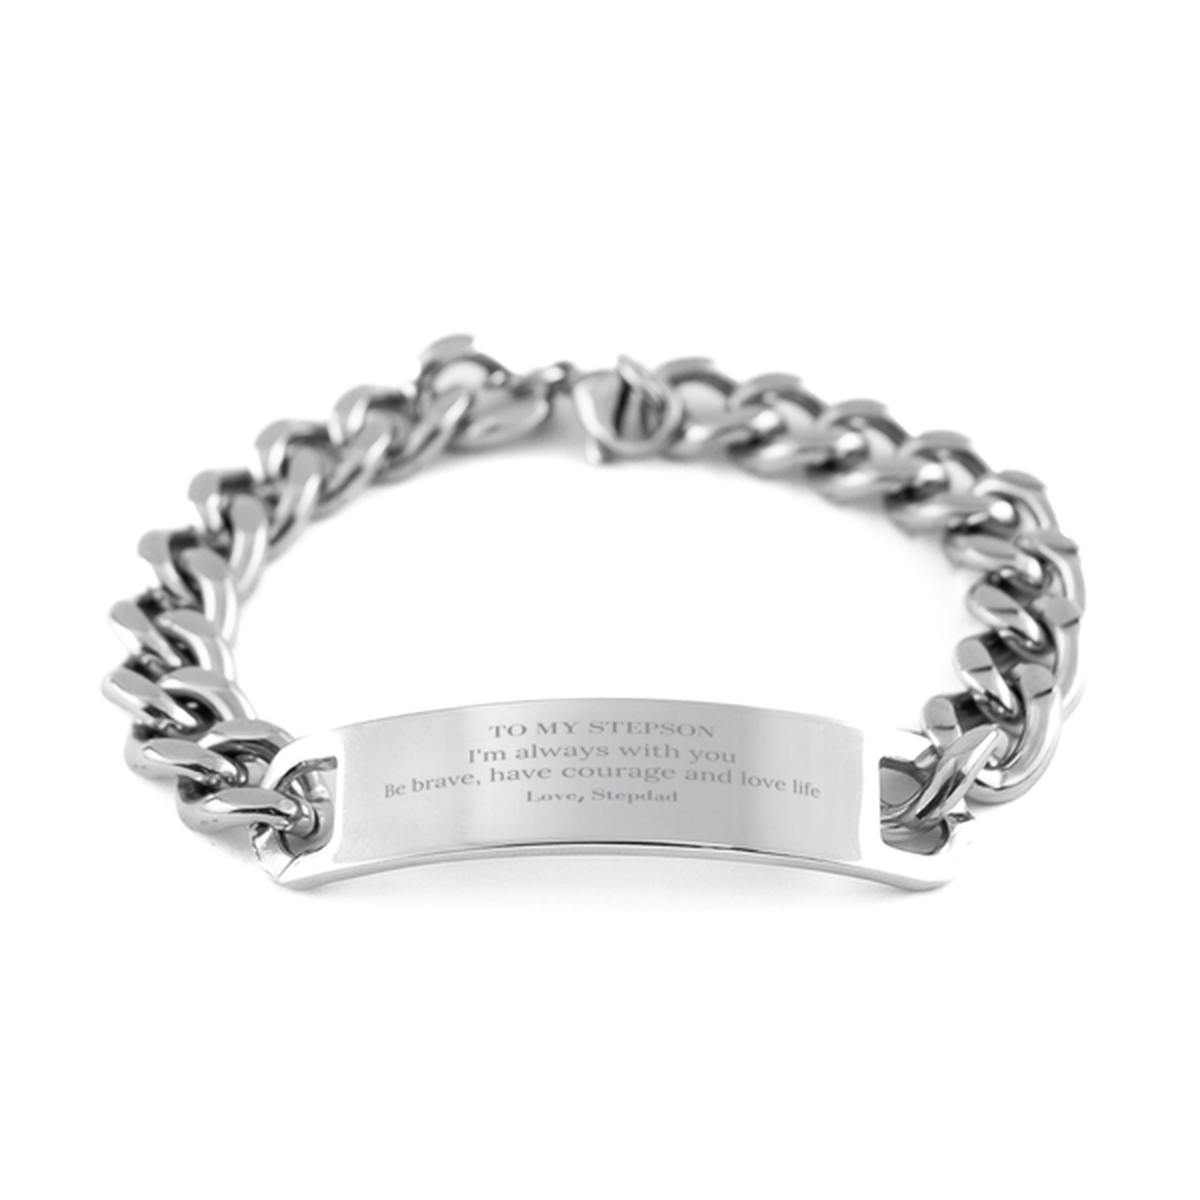 To My Stepson Gifts from Stepdad, Unique Cuban Chain Stainless Steel Bracelet Inspirational Christmas Birthday Graduation Gifts for Stepson I'm always with you. Be brave, have courage and love life. Love, Stepdad